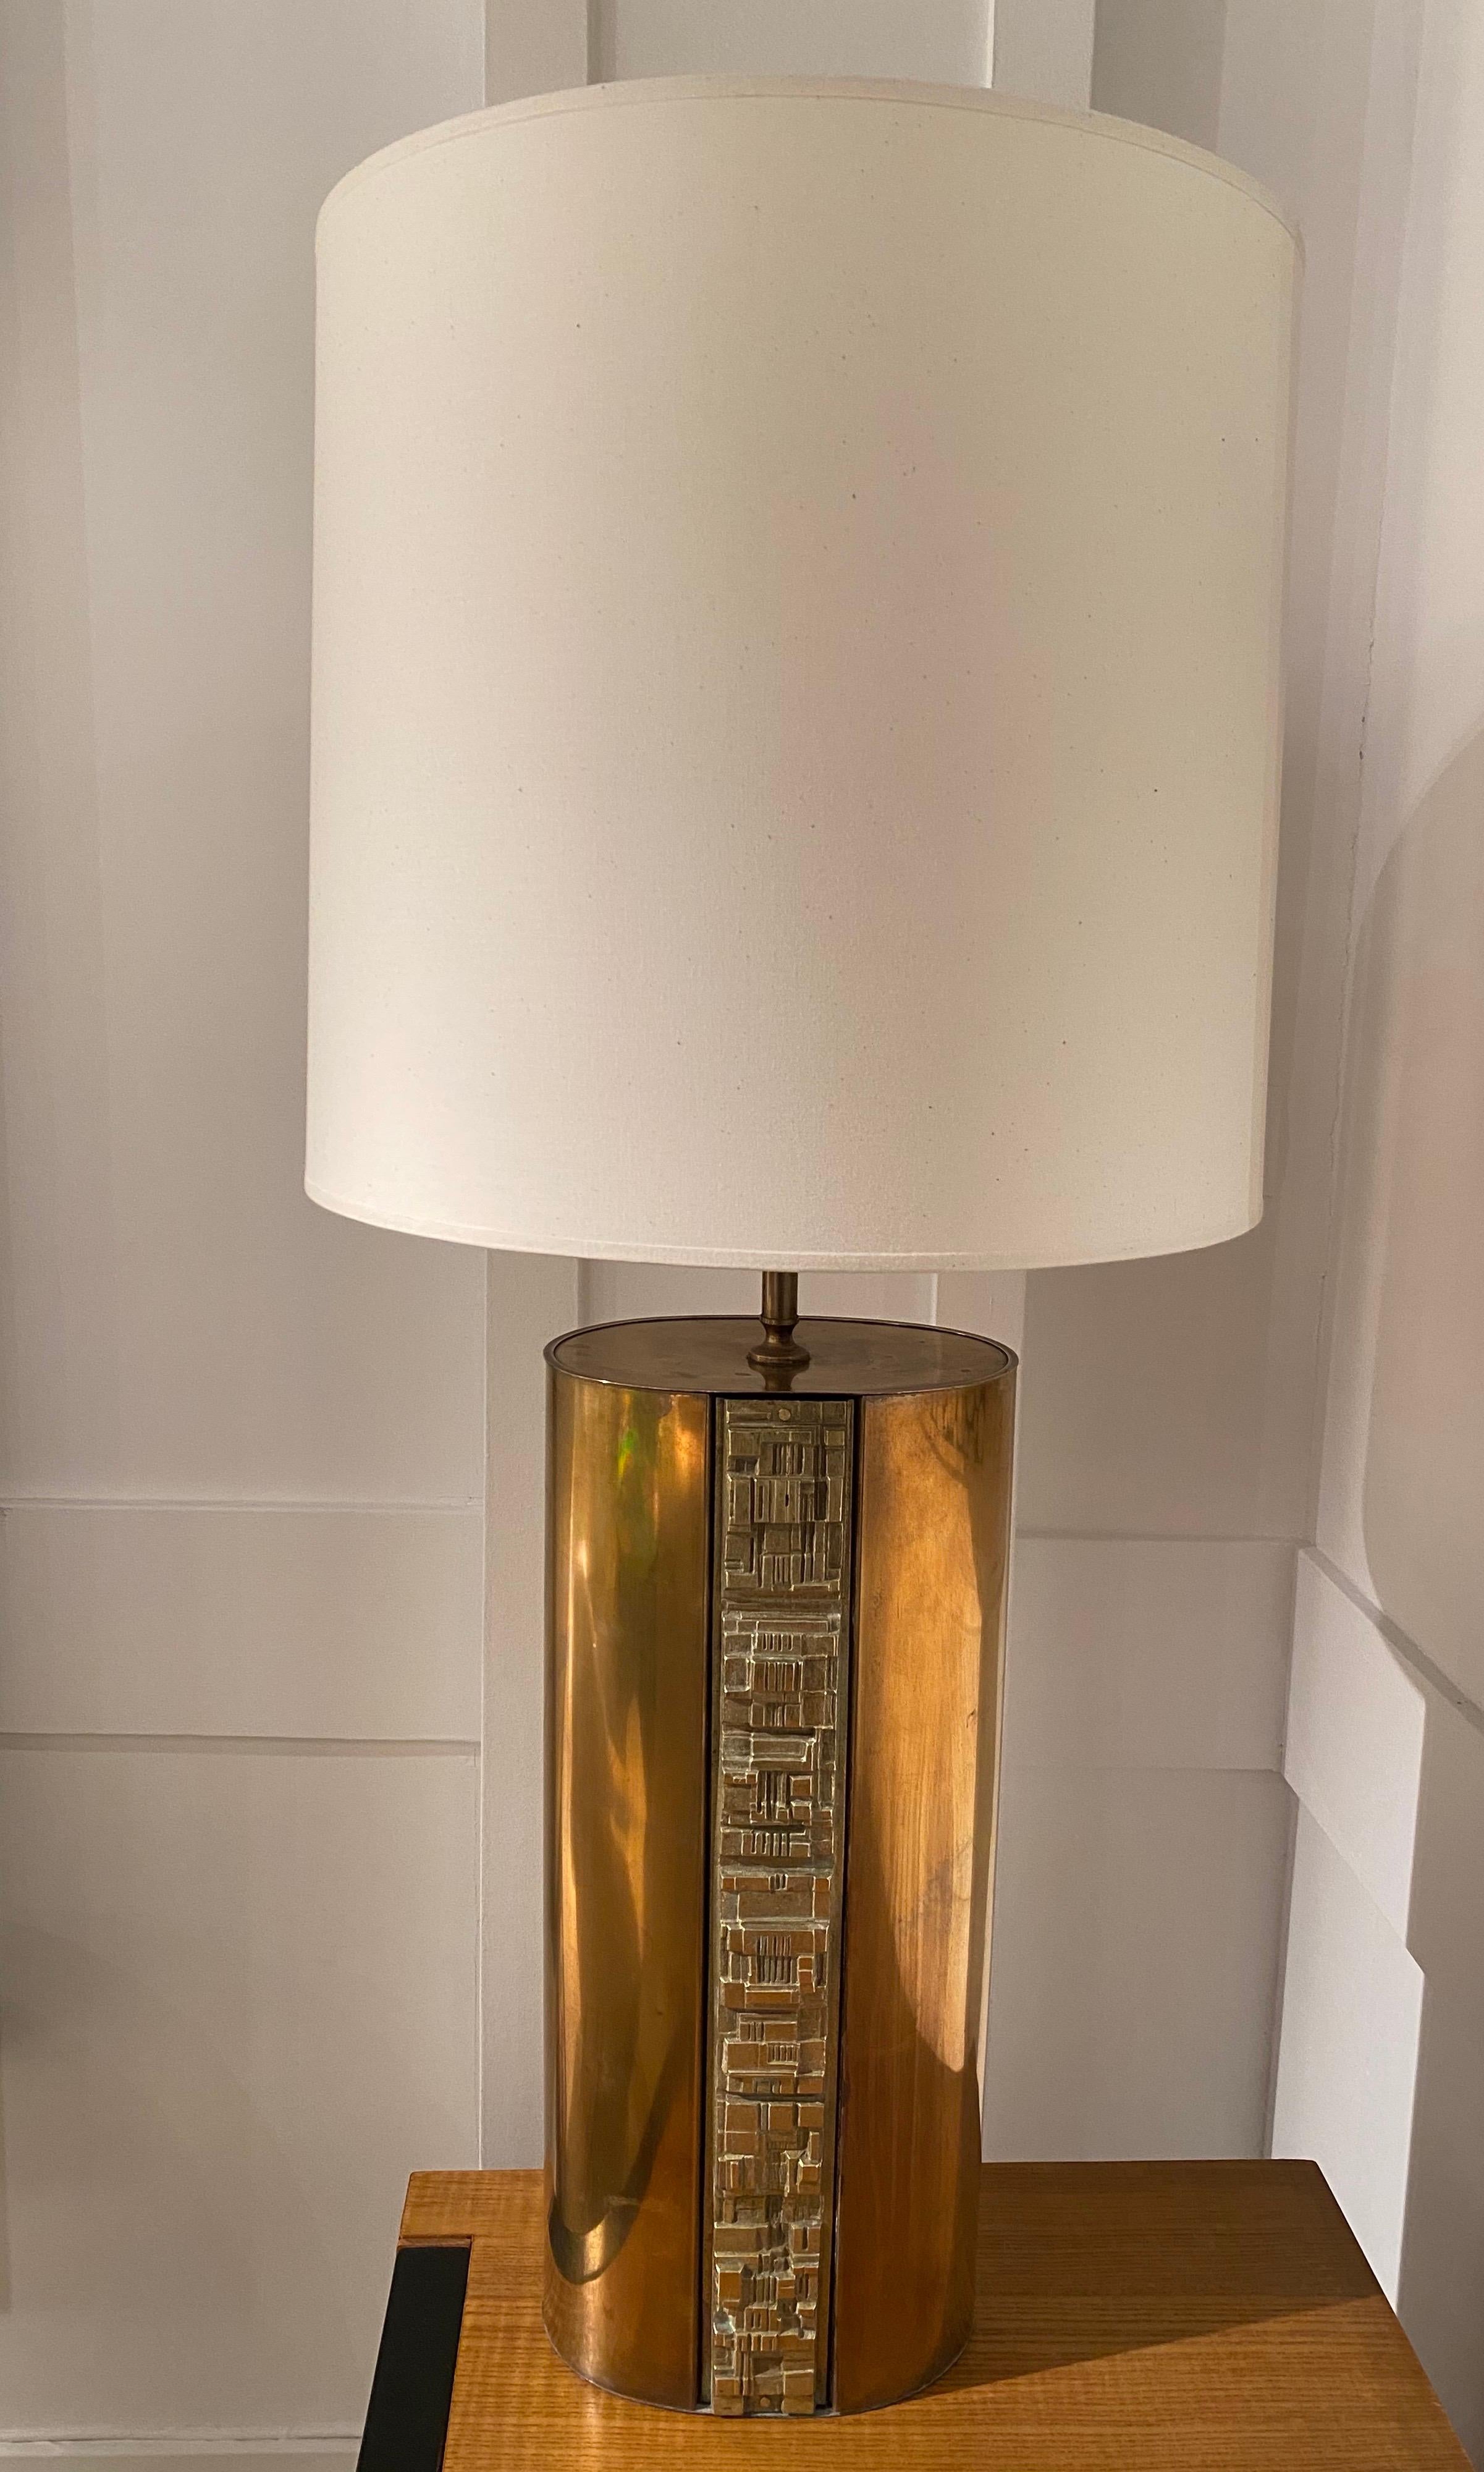 Large 1970s brass and bronze lamp by Angelo Brotto
Rewired with brand new shade.